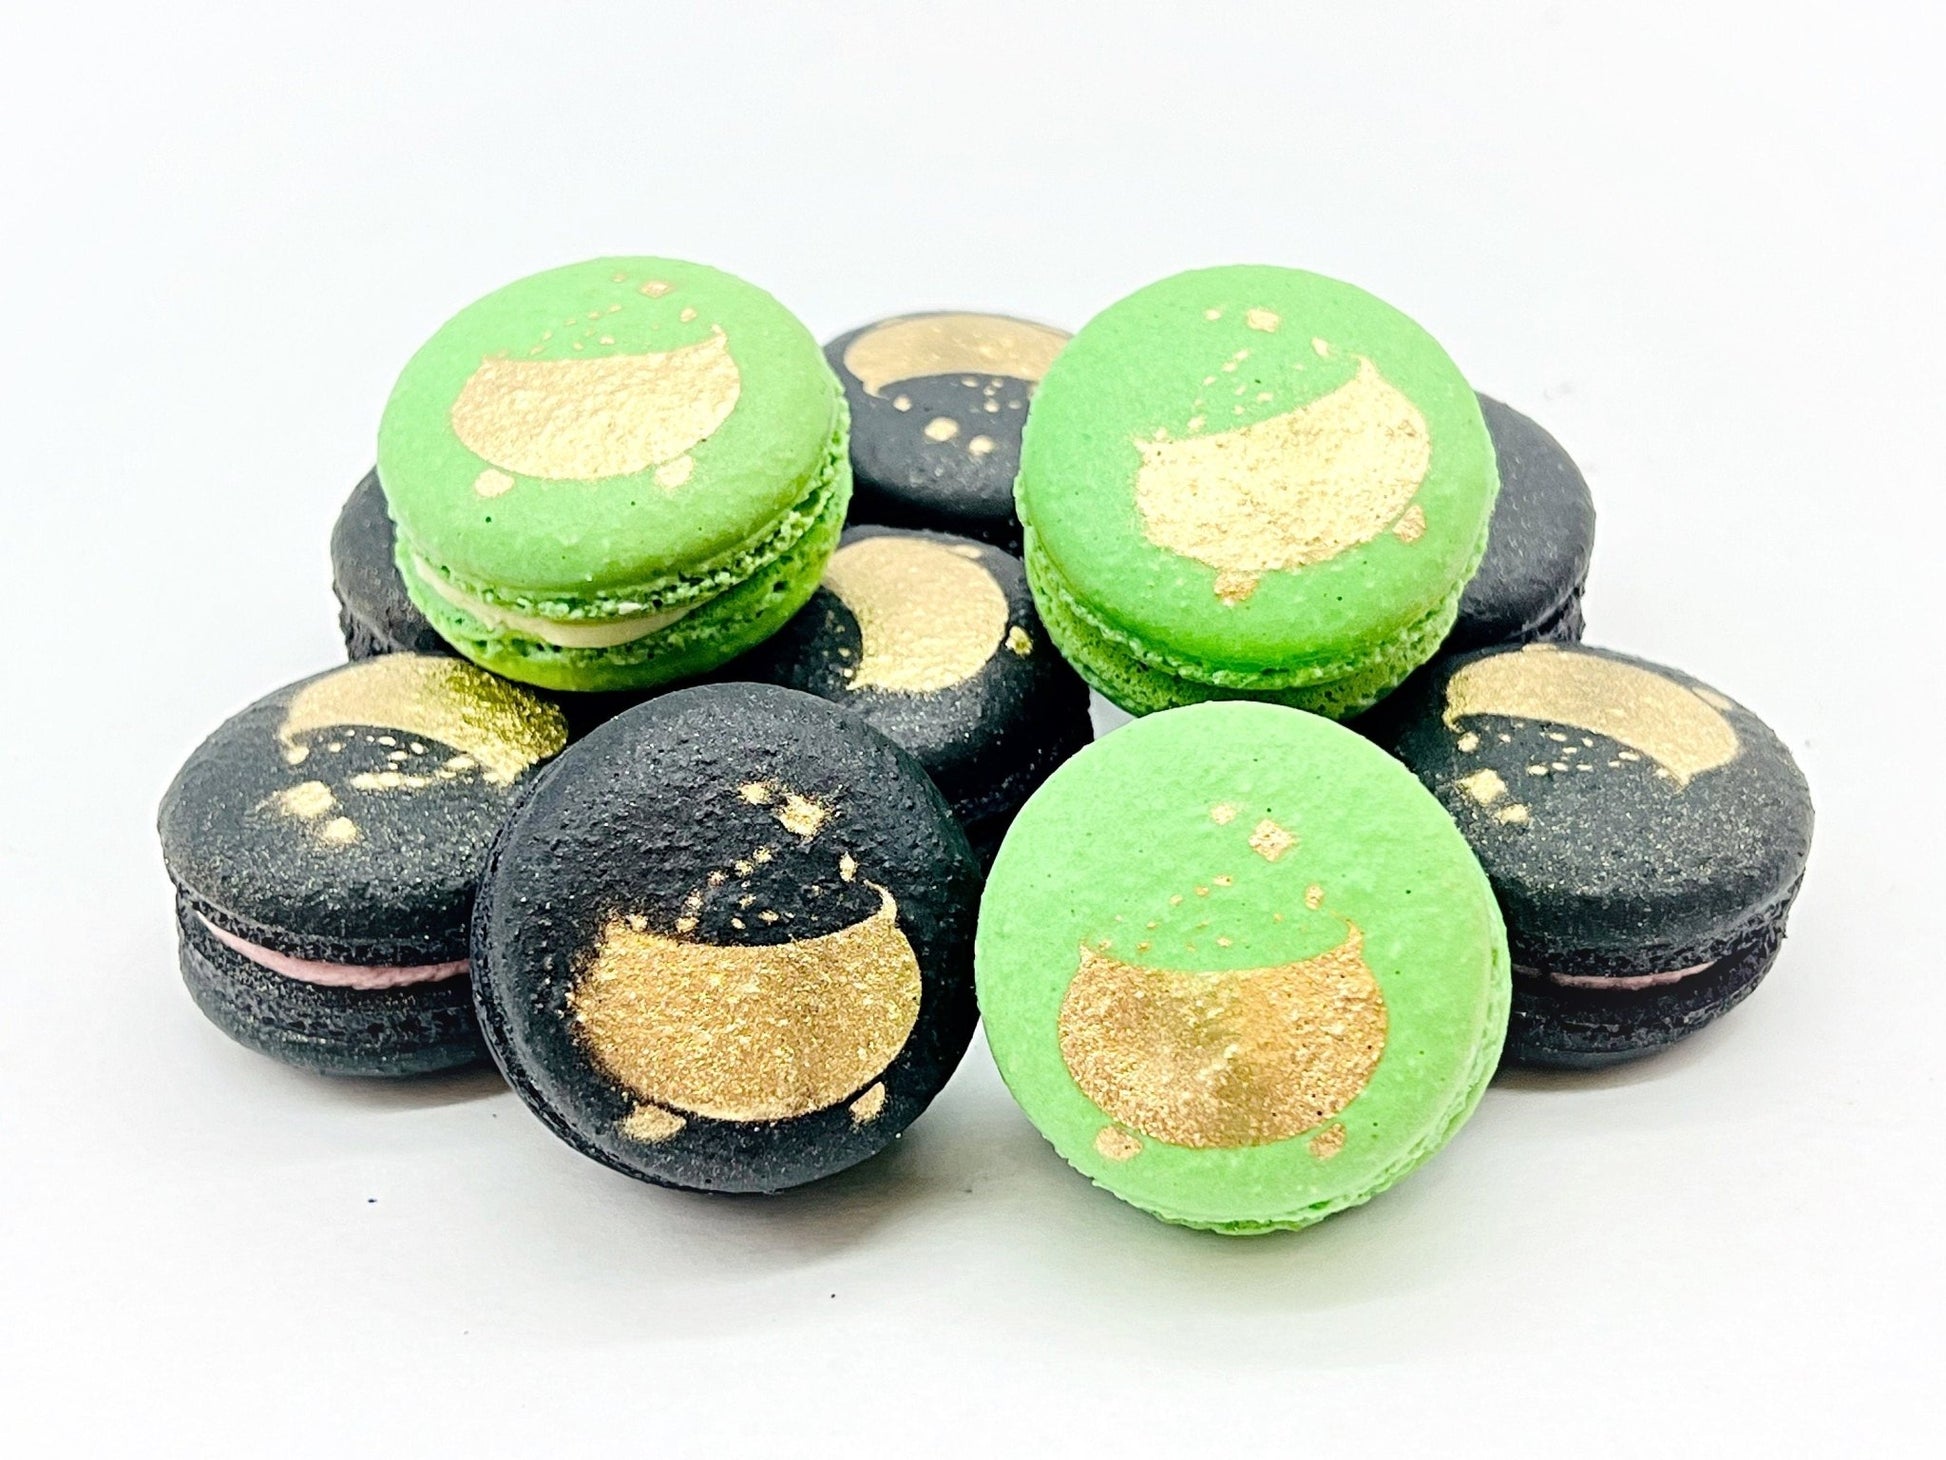 Pot of Gold French Vanilla Macaron Set | Perfect for upcoming St. Patrick's Day Celebration - Macaron CentraleApple & Espresso6 Pack